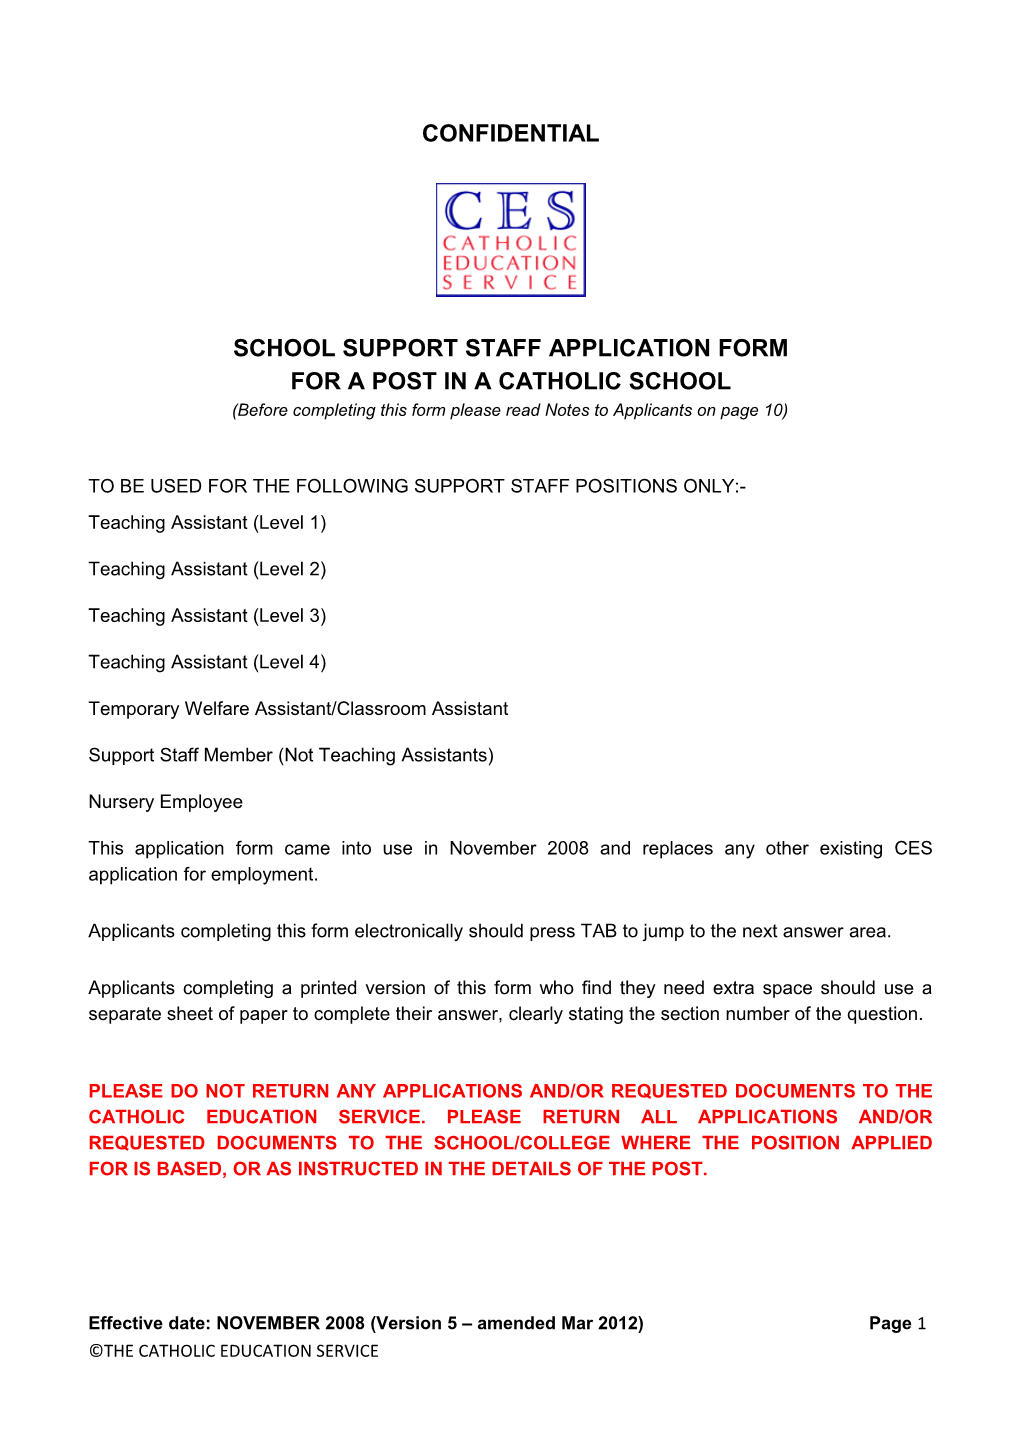 School Support Staff Application Form for a Post in a Catholicschool